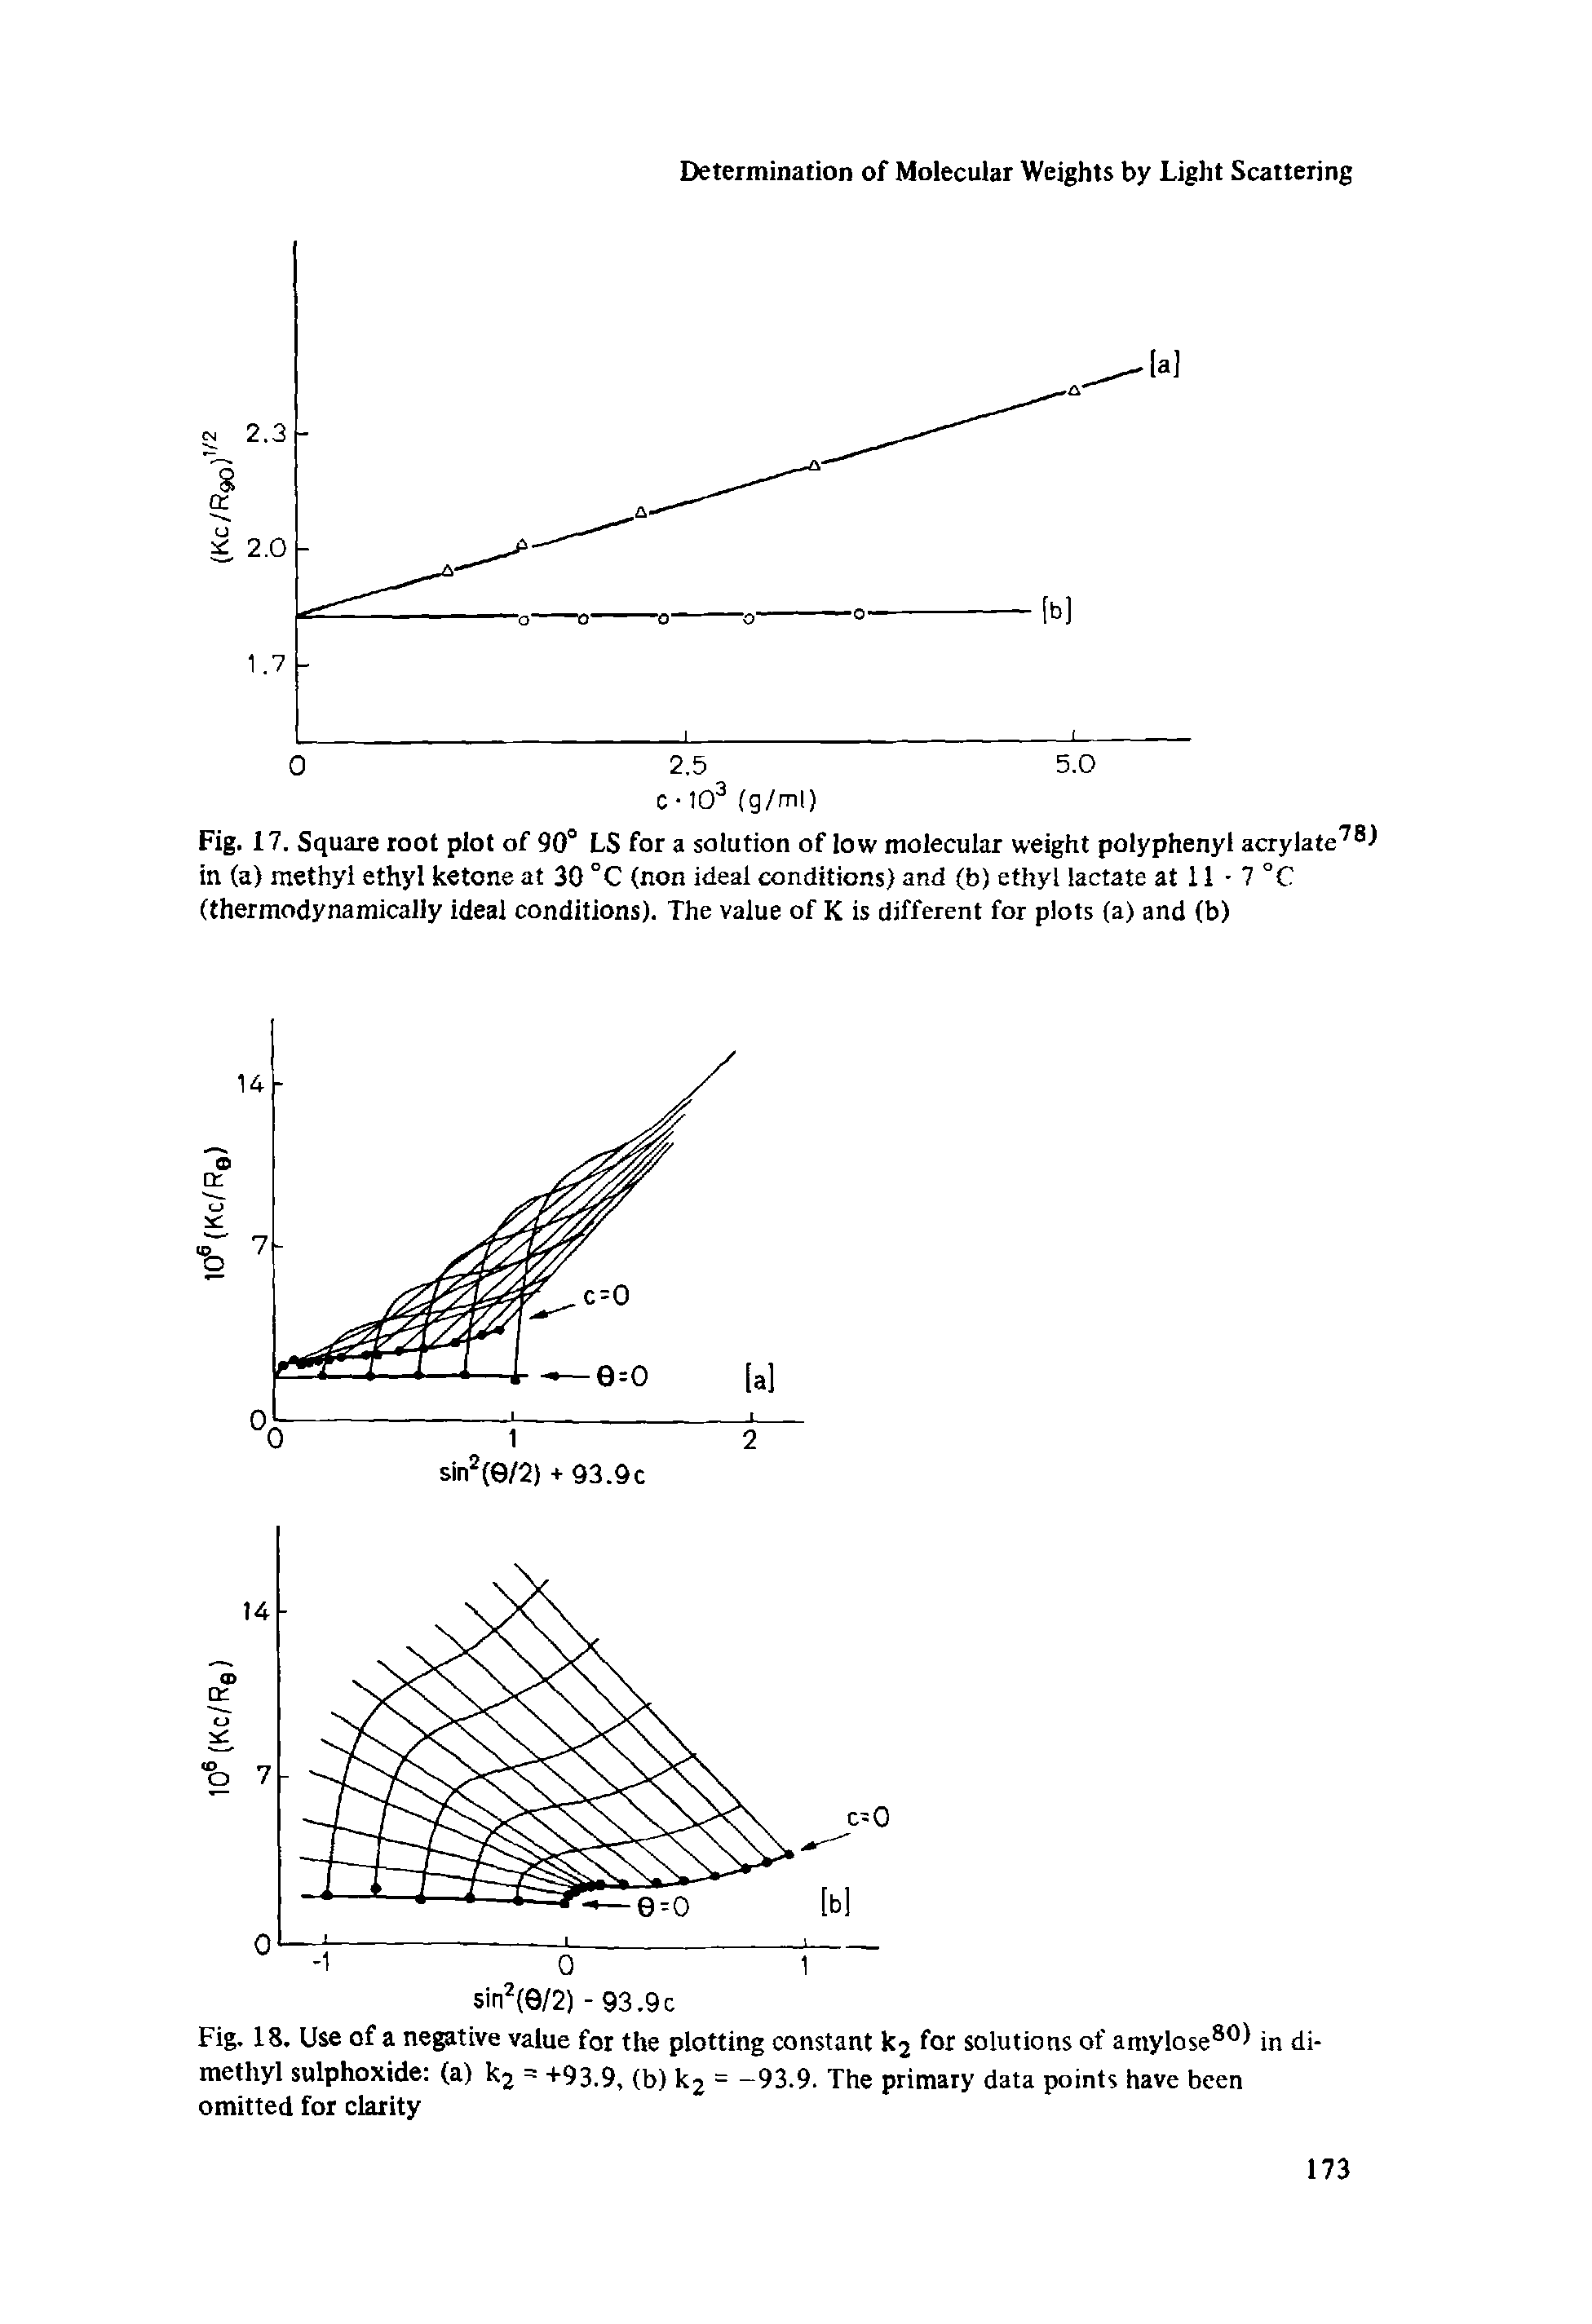 Fig. 18. Use of a negative value for the plotting constant kj for solutions of amylase80) in dimethyl sulphoxide (a) kj = +93.9, (b) kj = -93.9. The primary data points have been omitted for clarity...